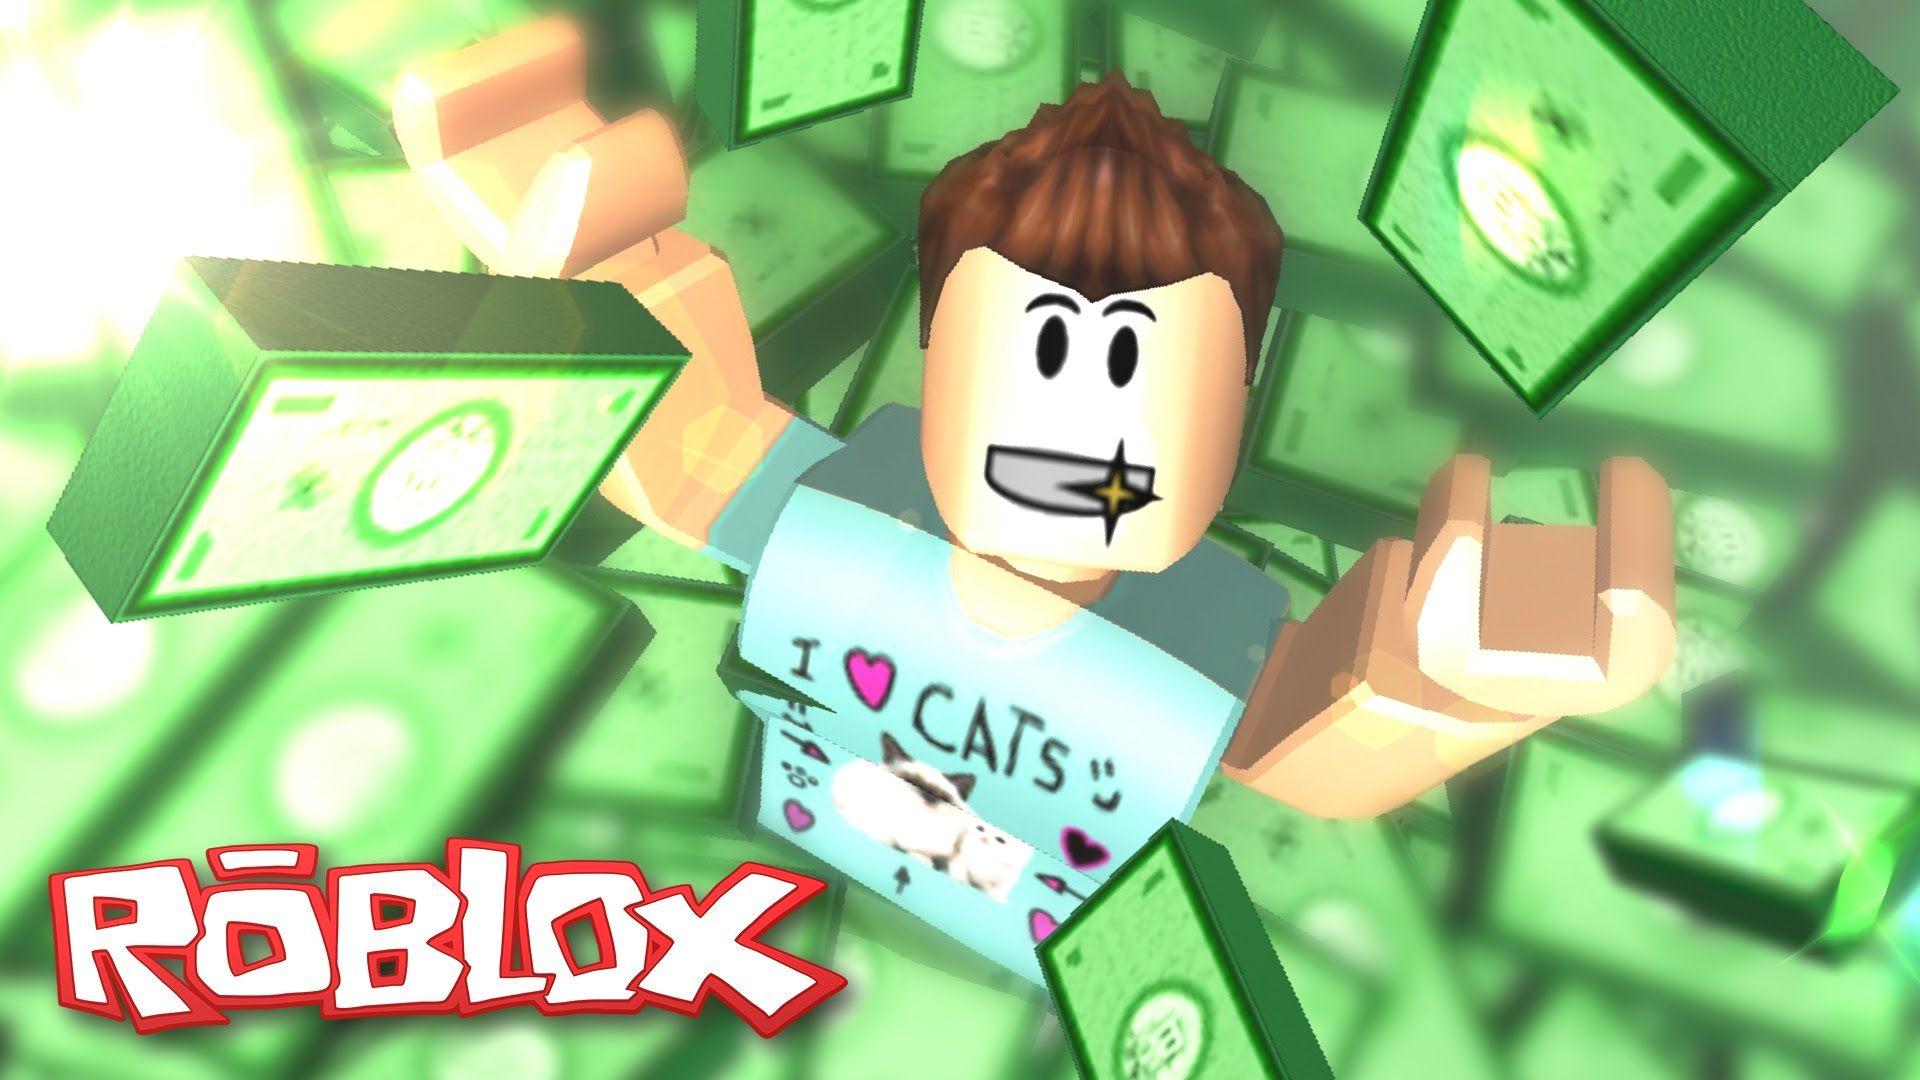 Roblox Character Aesthetic Wallpapers Wallpaper Cave